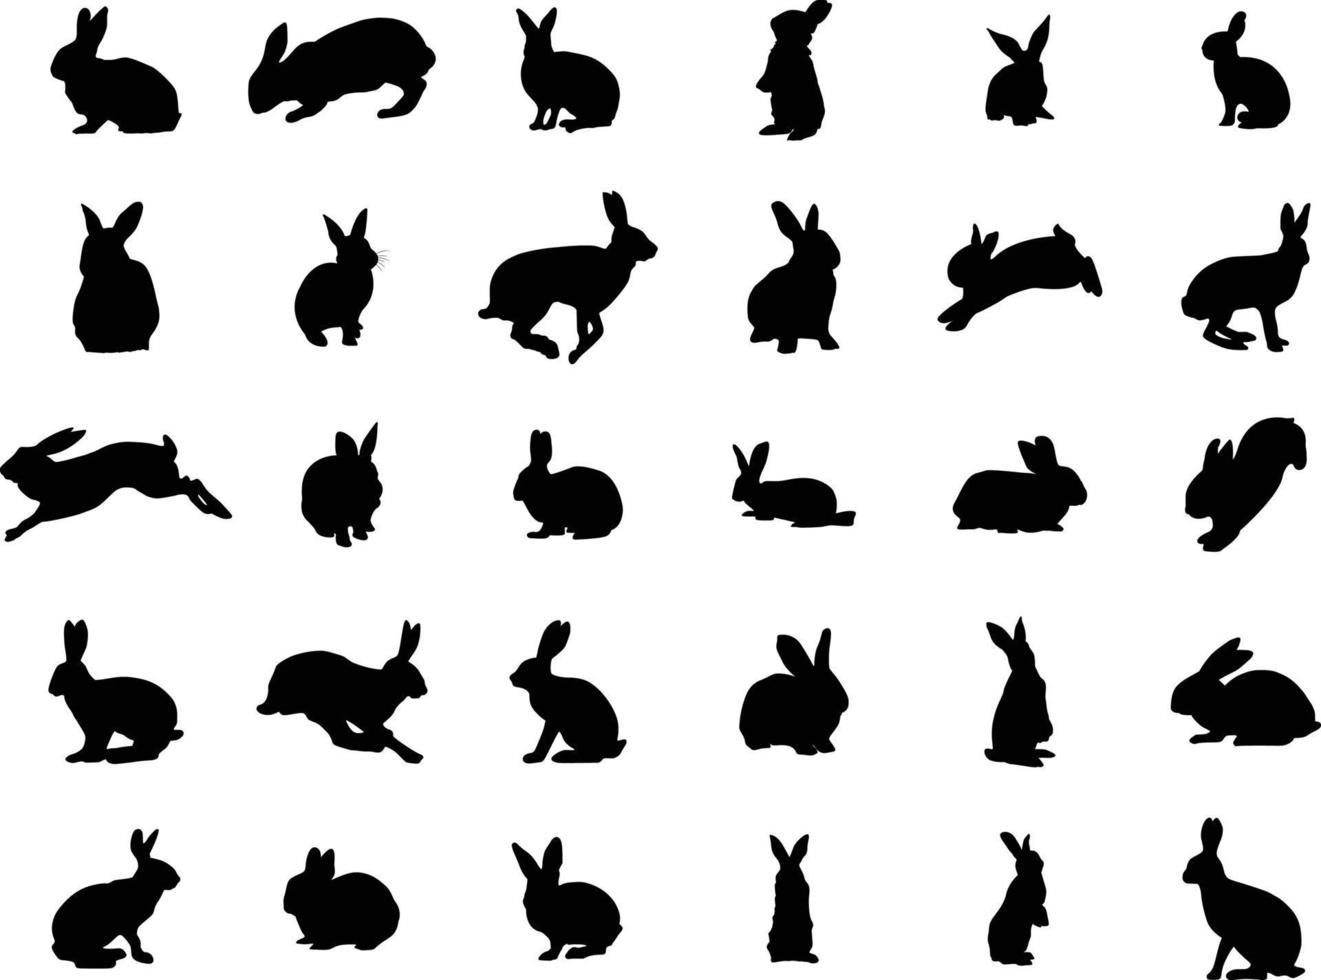 Silhouettes of easter bunnies isolated on a white background. Set of different rabbits silhouettes for design use. vector